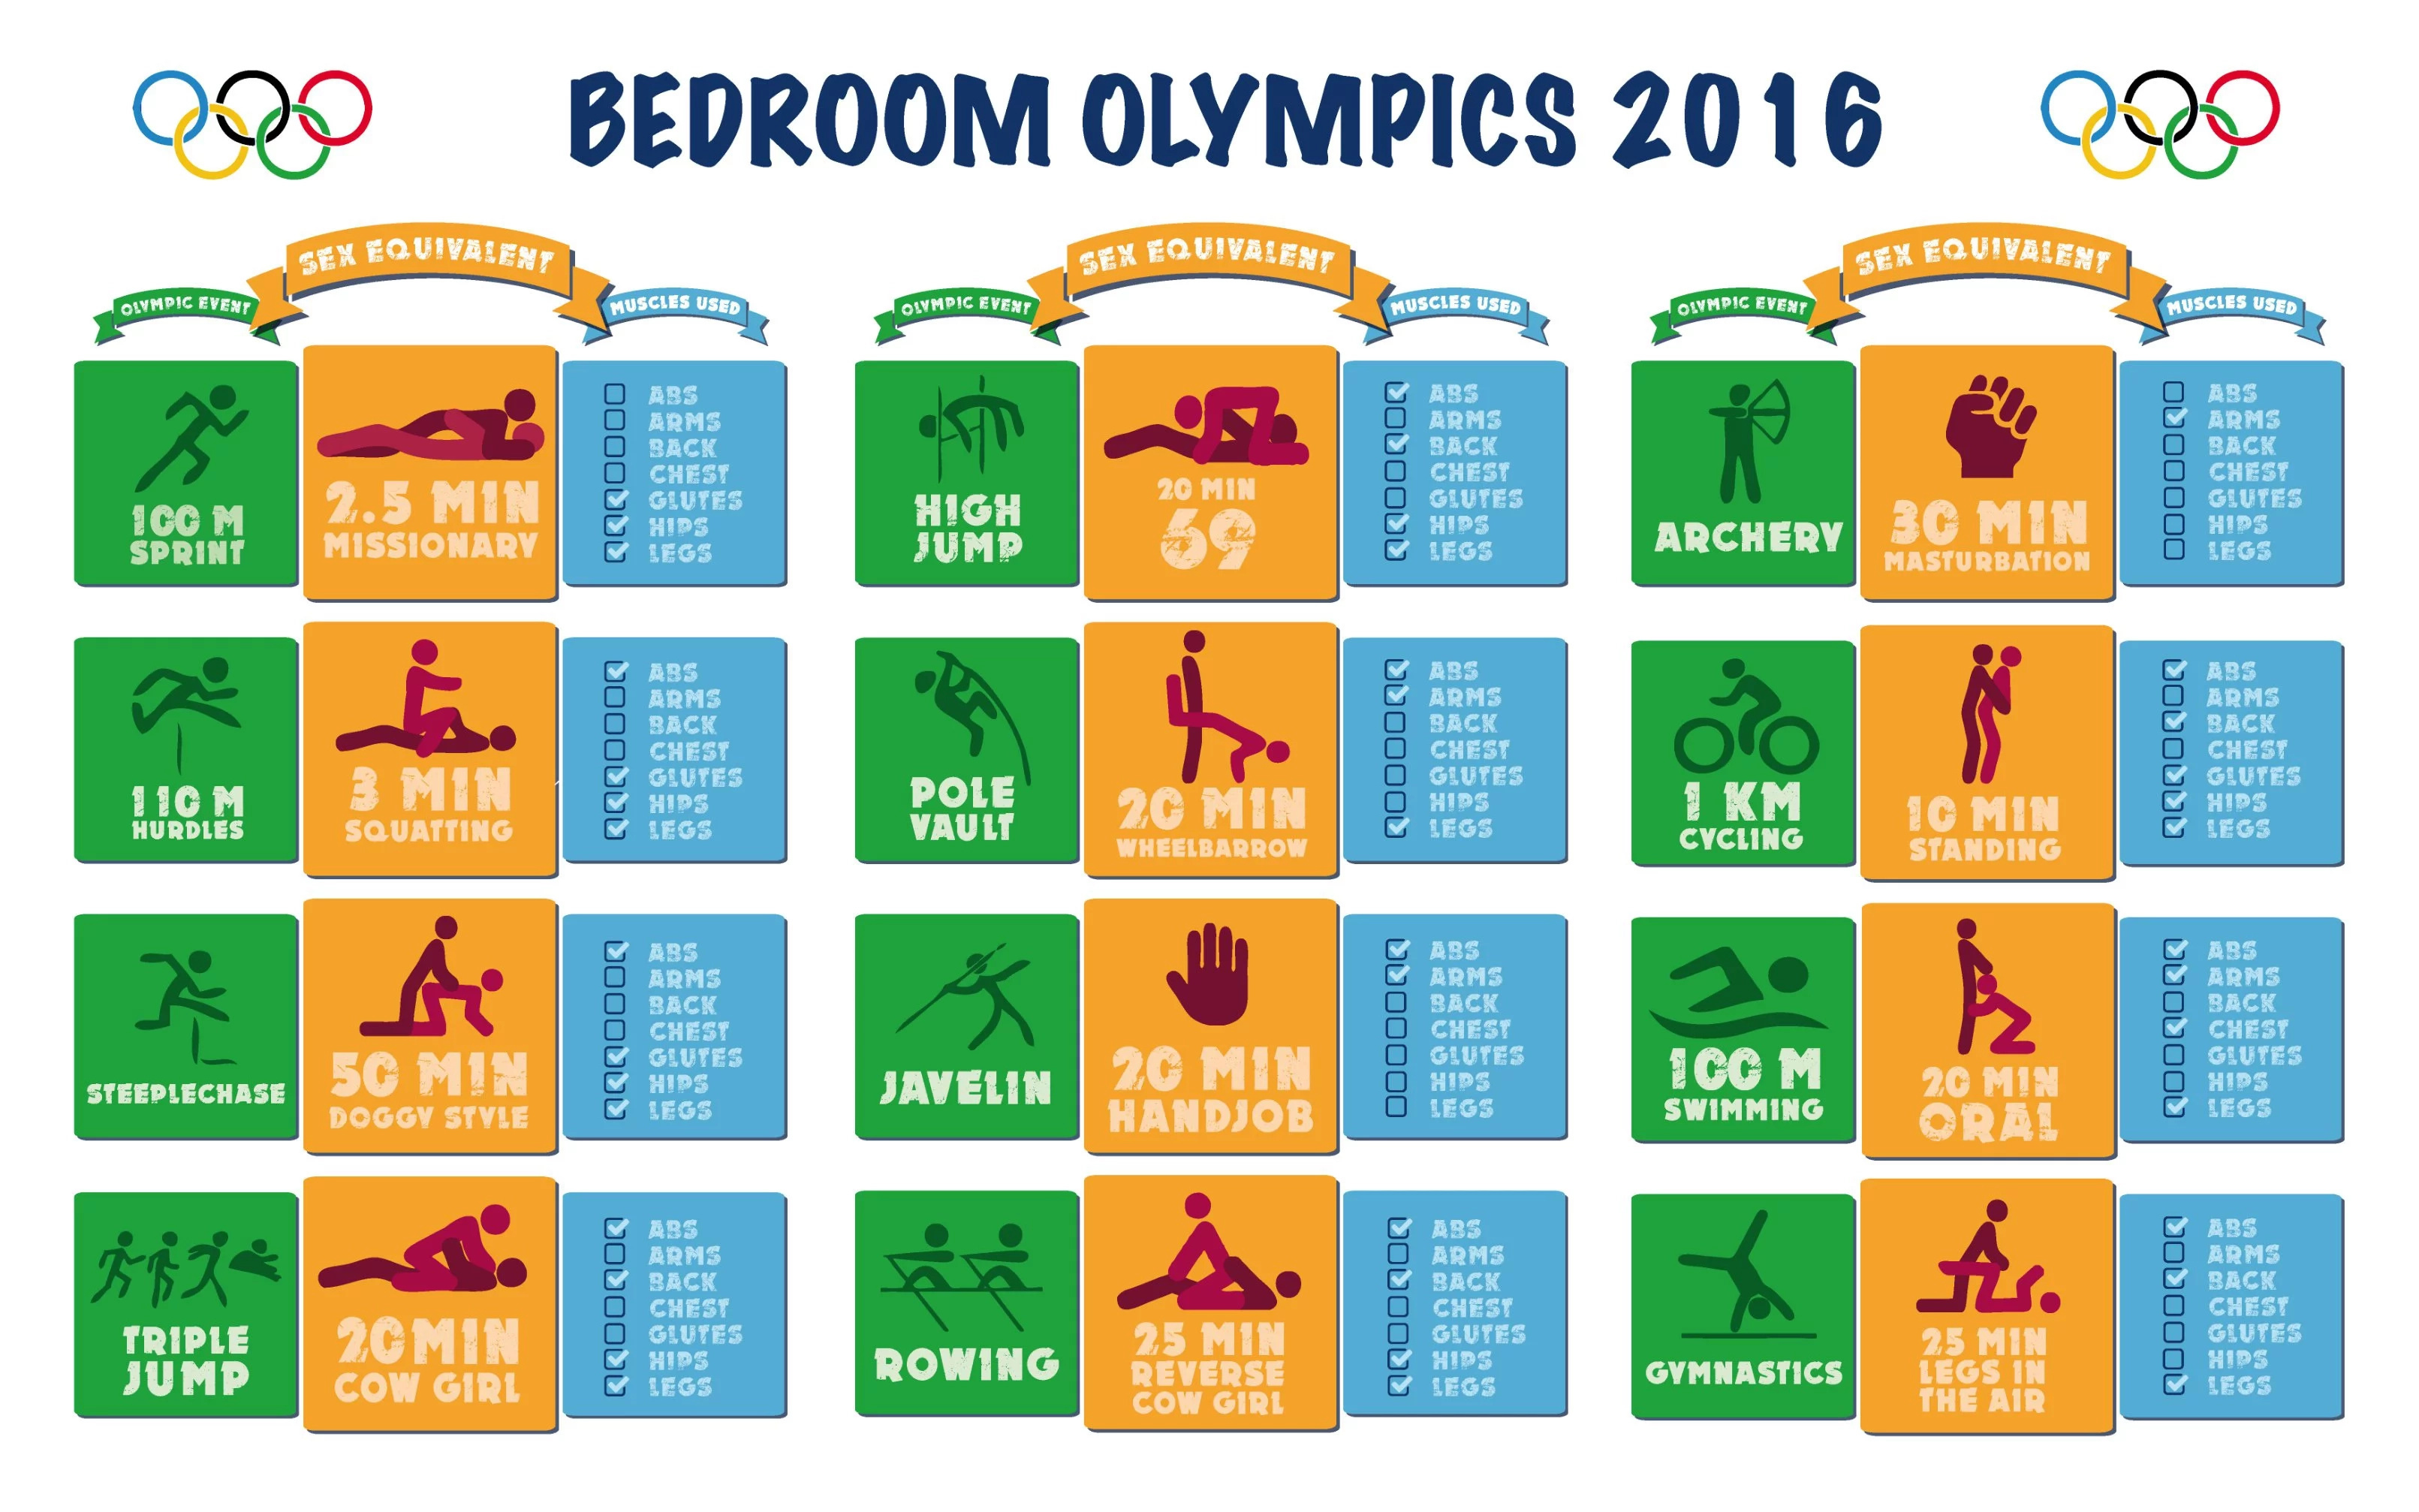 12 positions to win you medal in the "Bedroom Olympics"